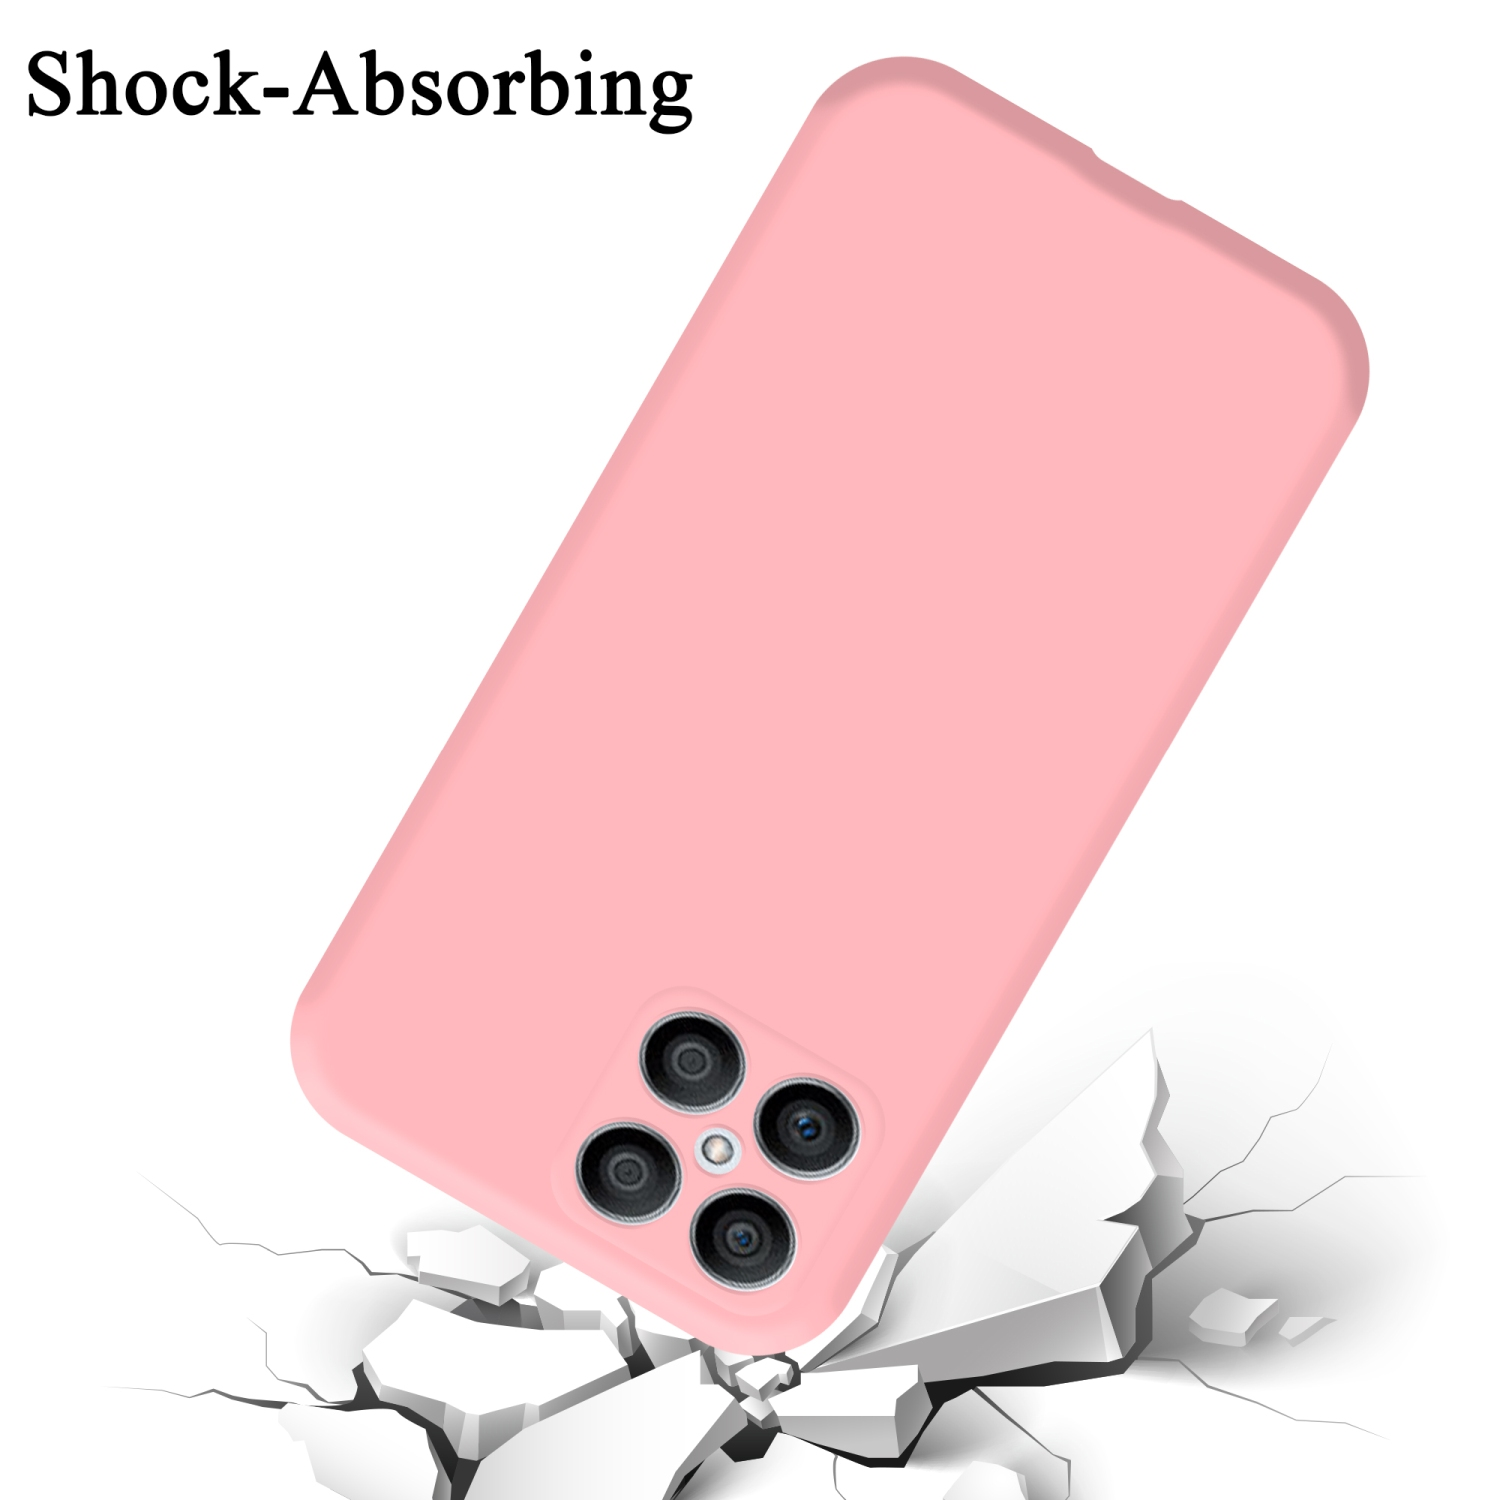 LIQUID Backcover, Liquid Honor, Case Style, im PINK X8, CADORABO Hülle Silicone